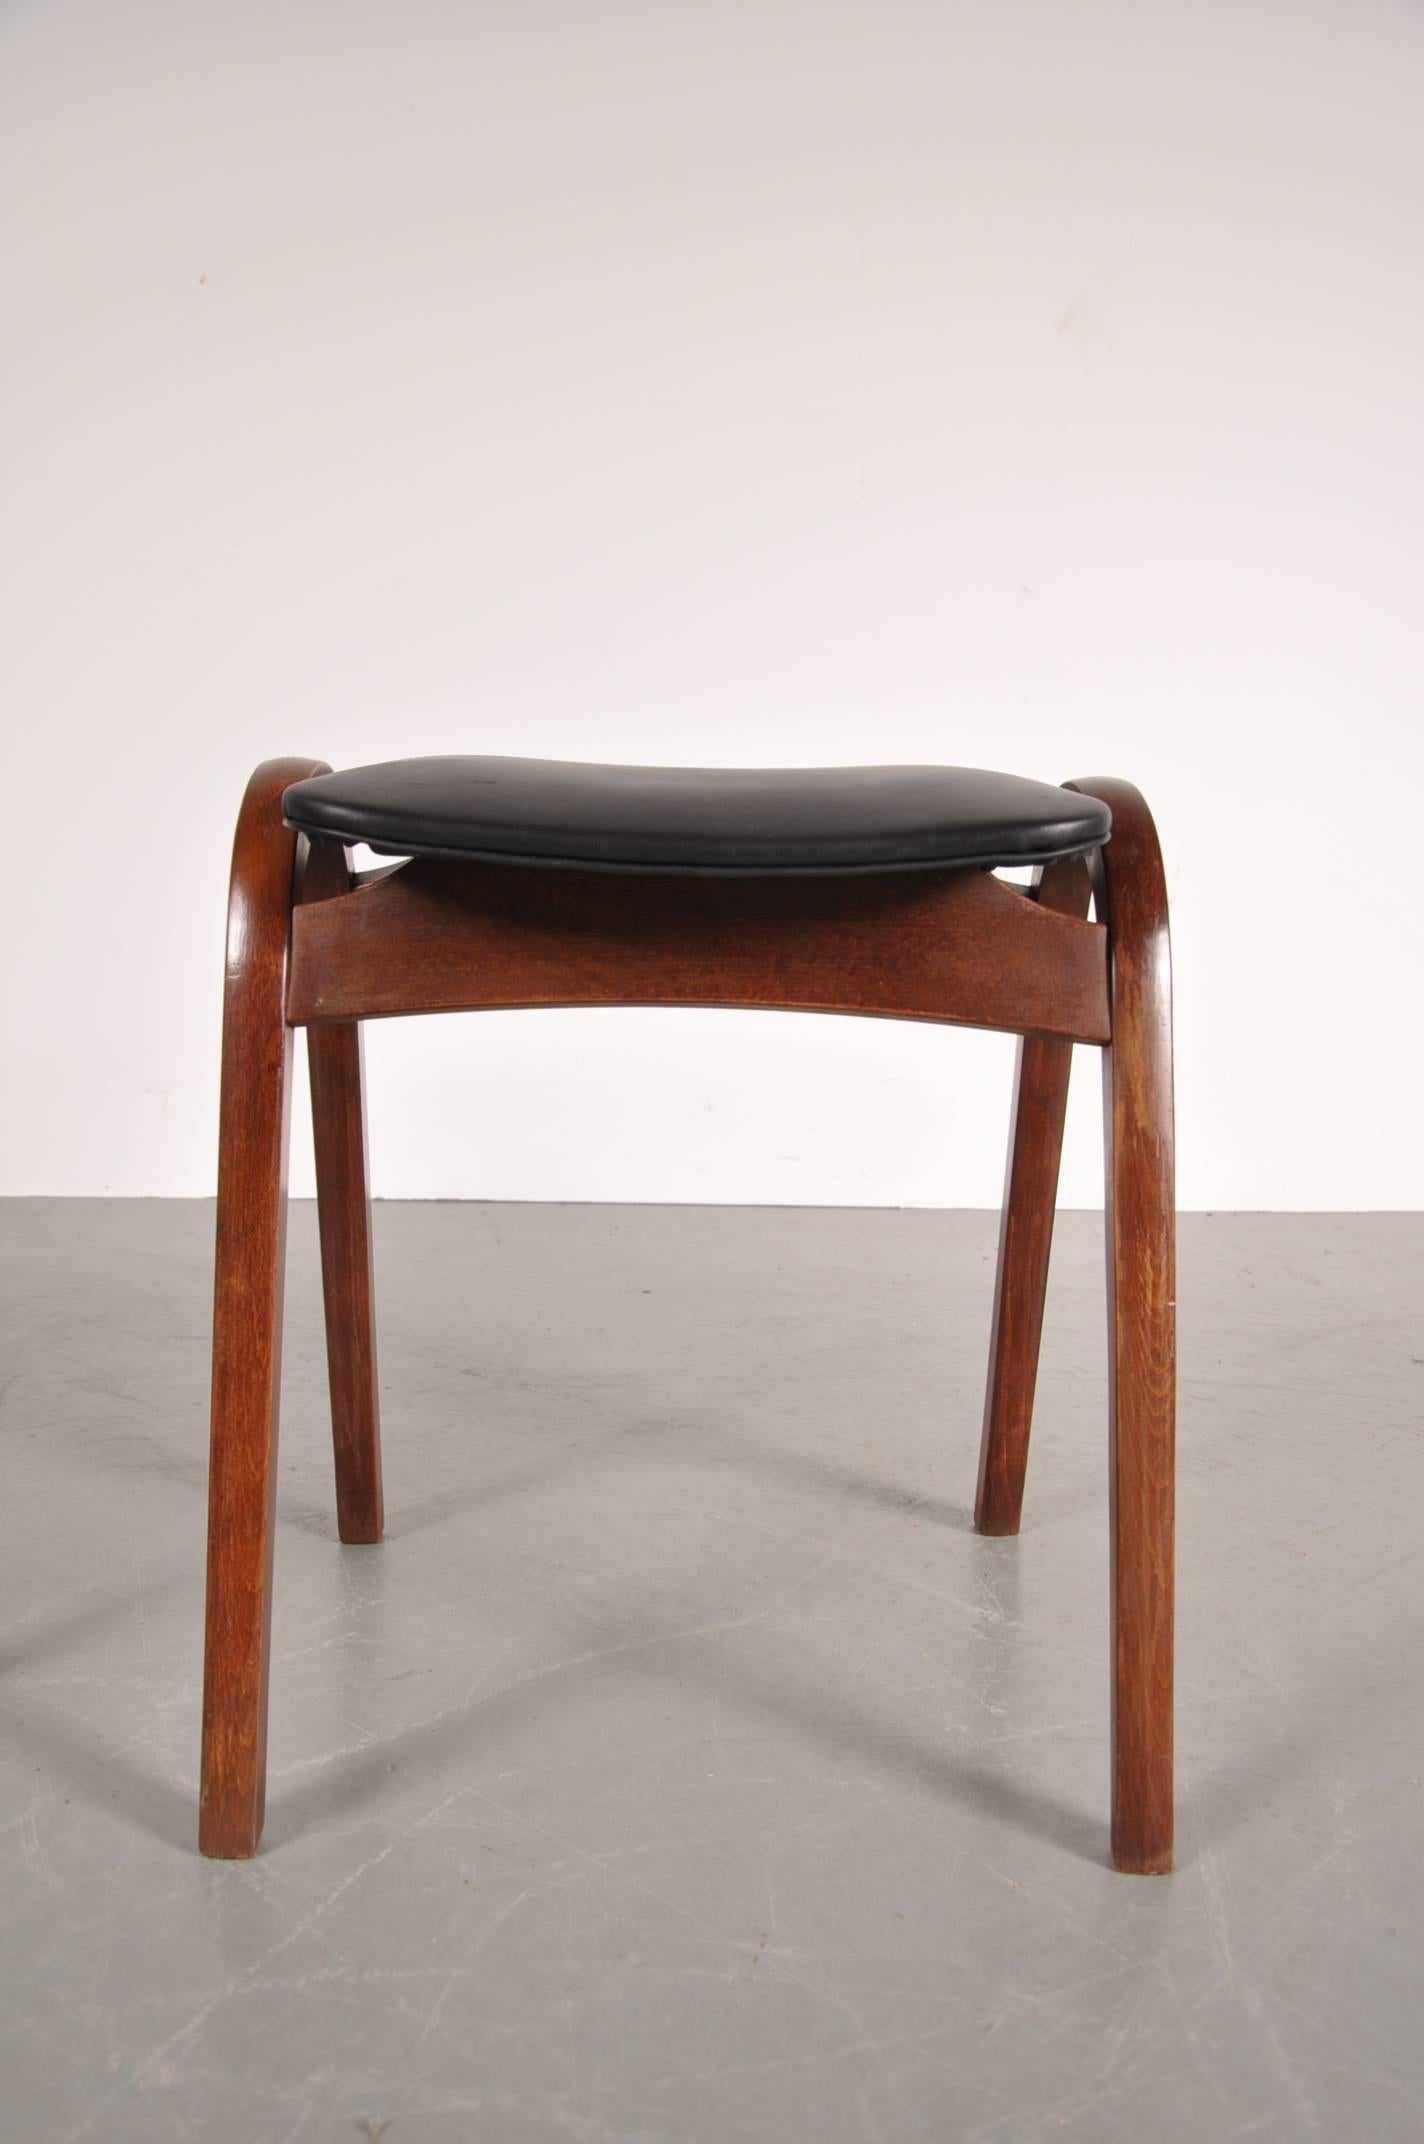 Mid-20th Century Stacking Stools by Isamu Kenmochi for Tendo, Japan 1958